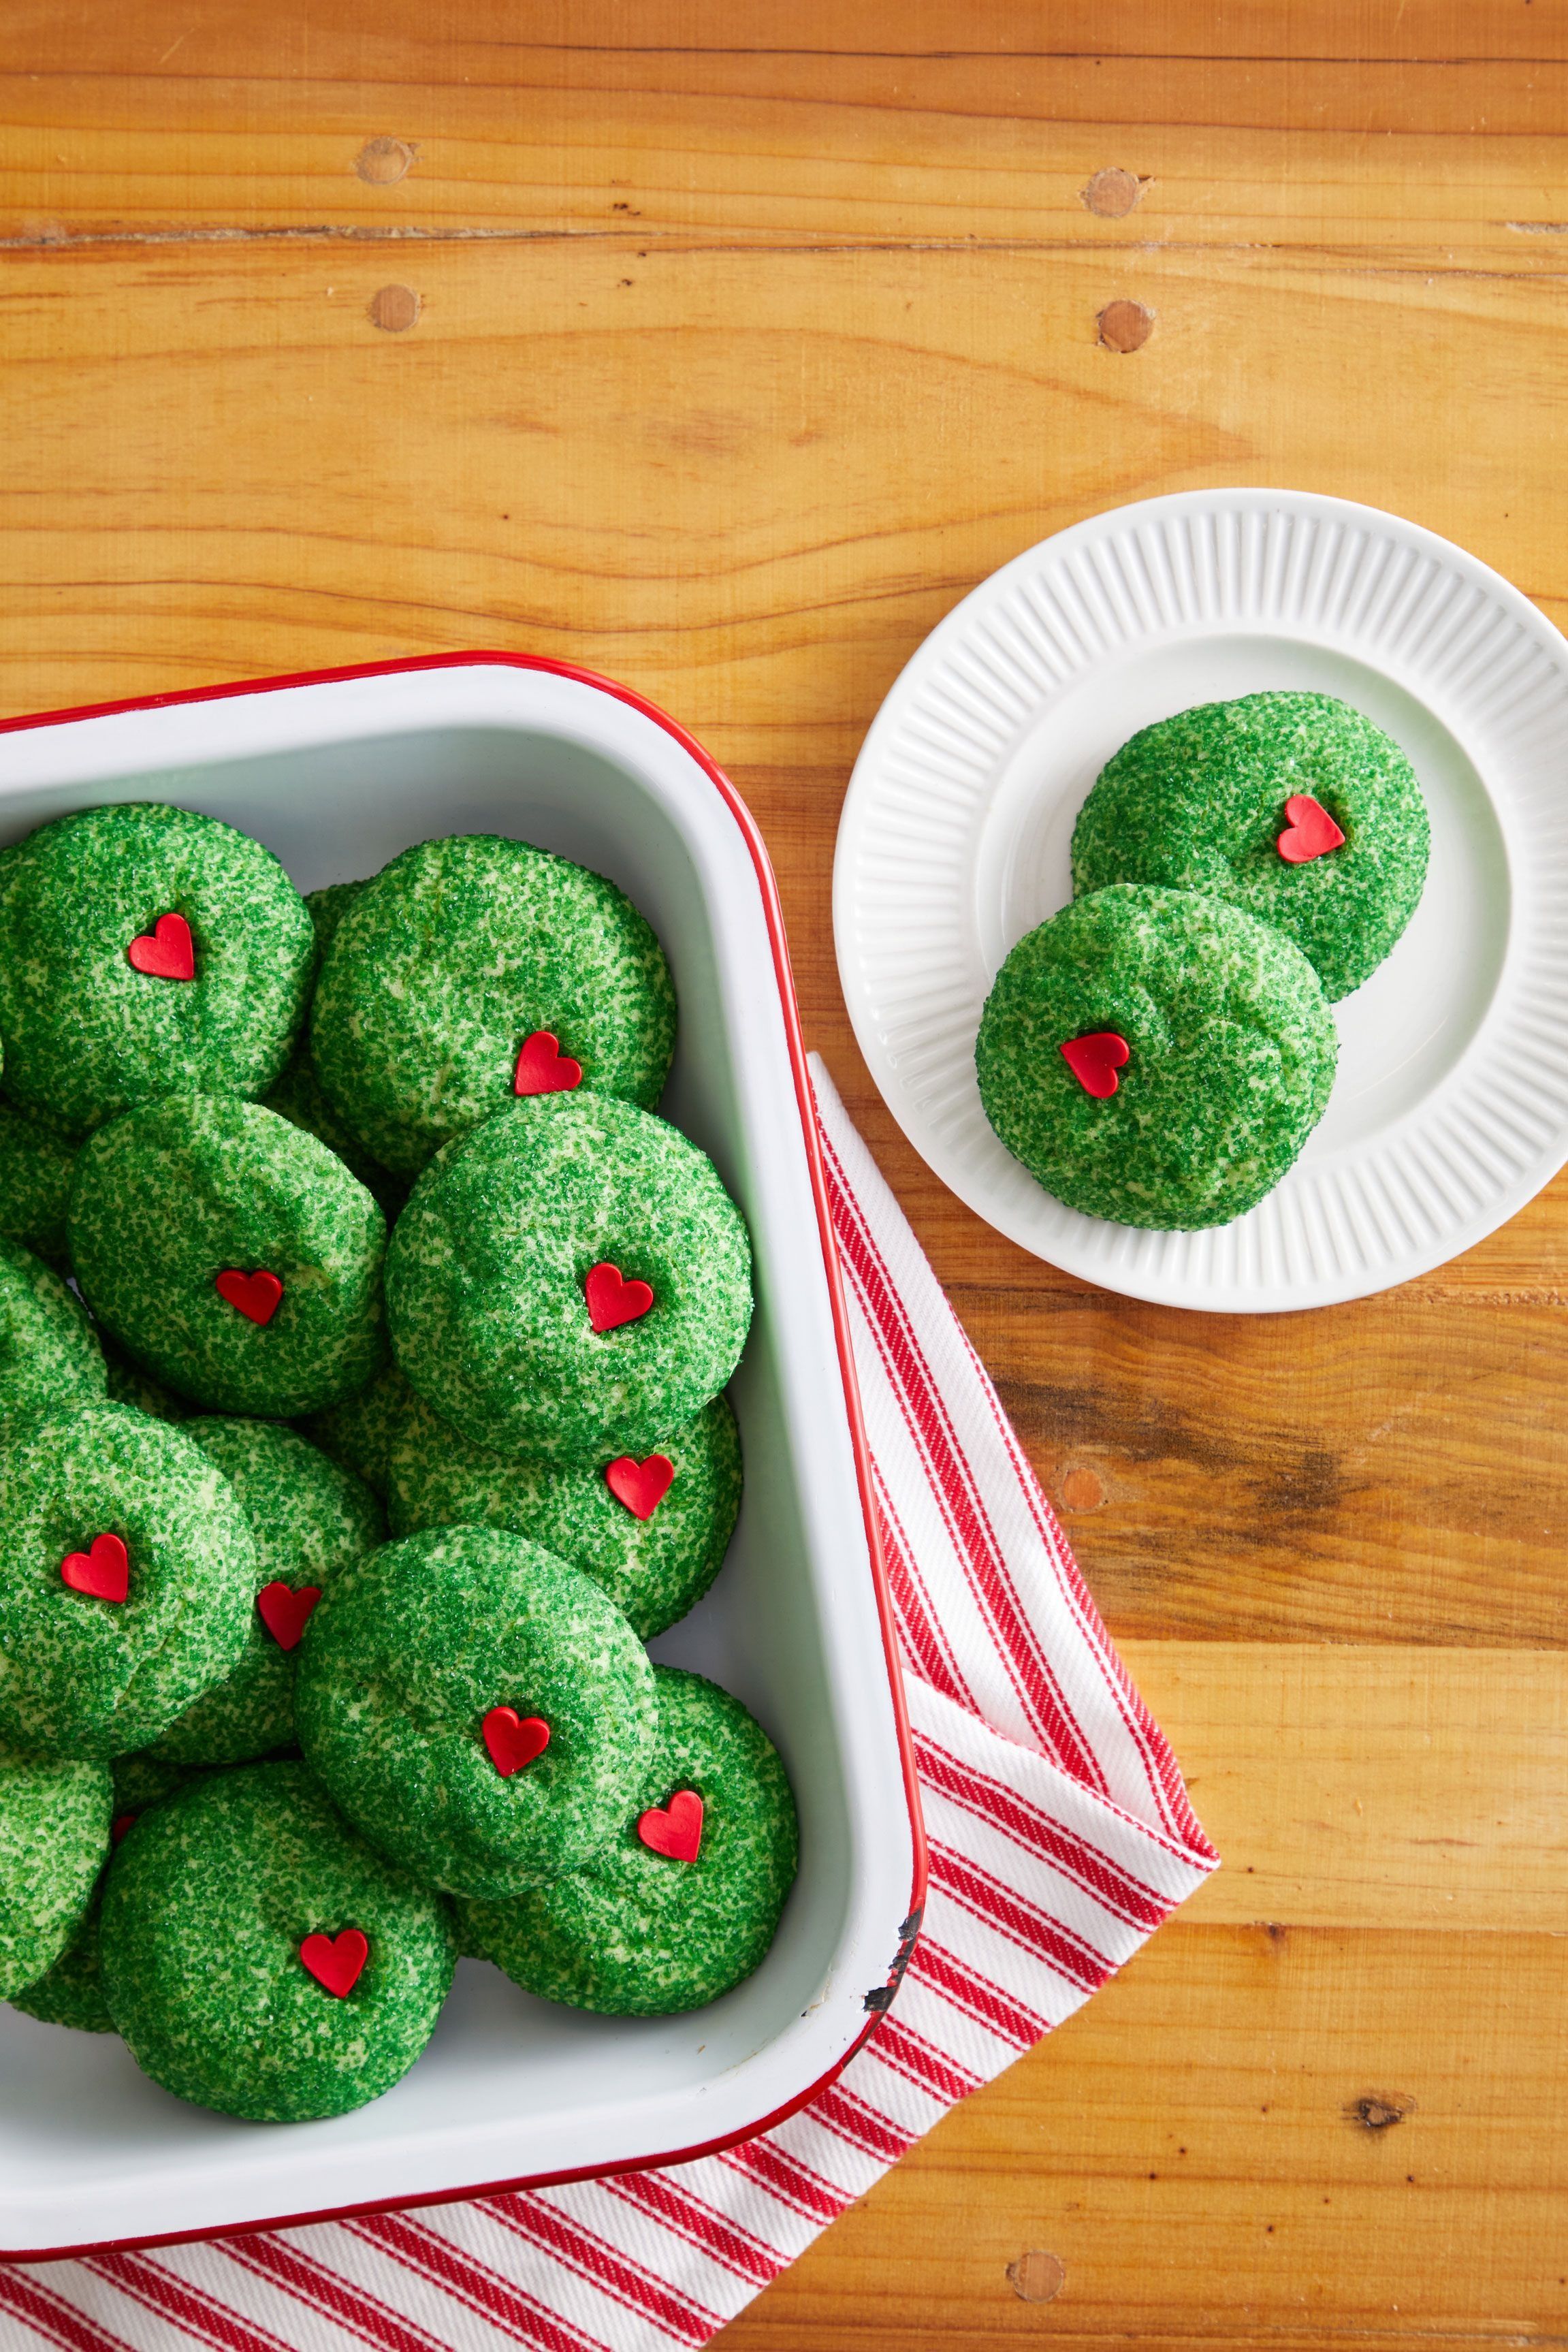 40 Grinch Party Food and Drink Ideas